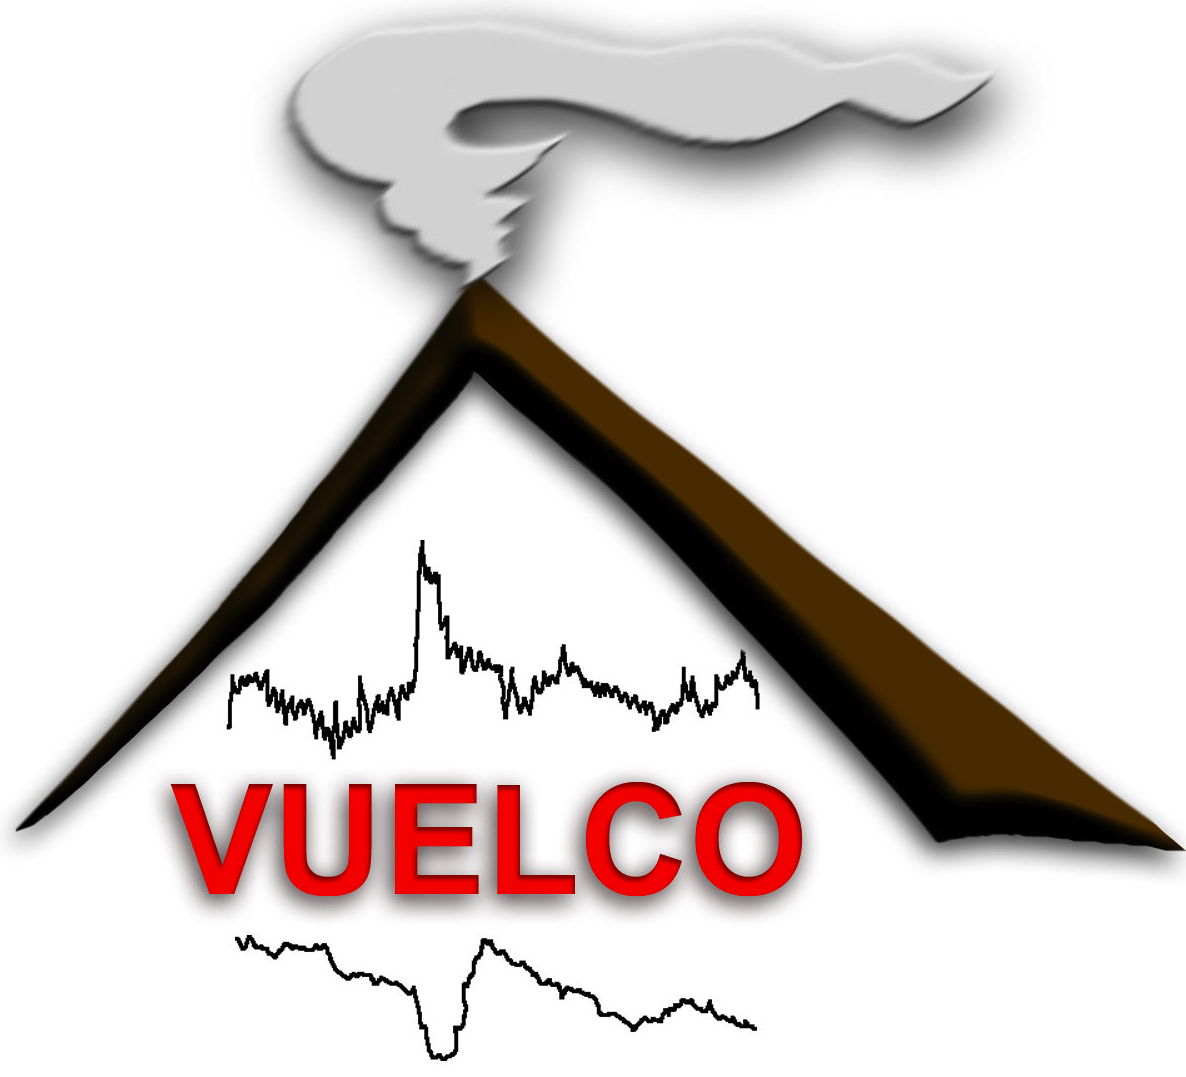 VUELCO Volcanic unrest in Europe and Latin America: Phenomenology, eruption precursors, hazard forecast, and risk mitigation group image